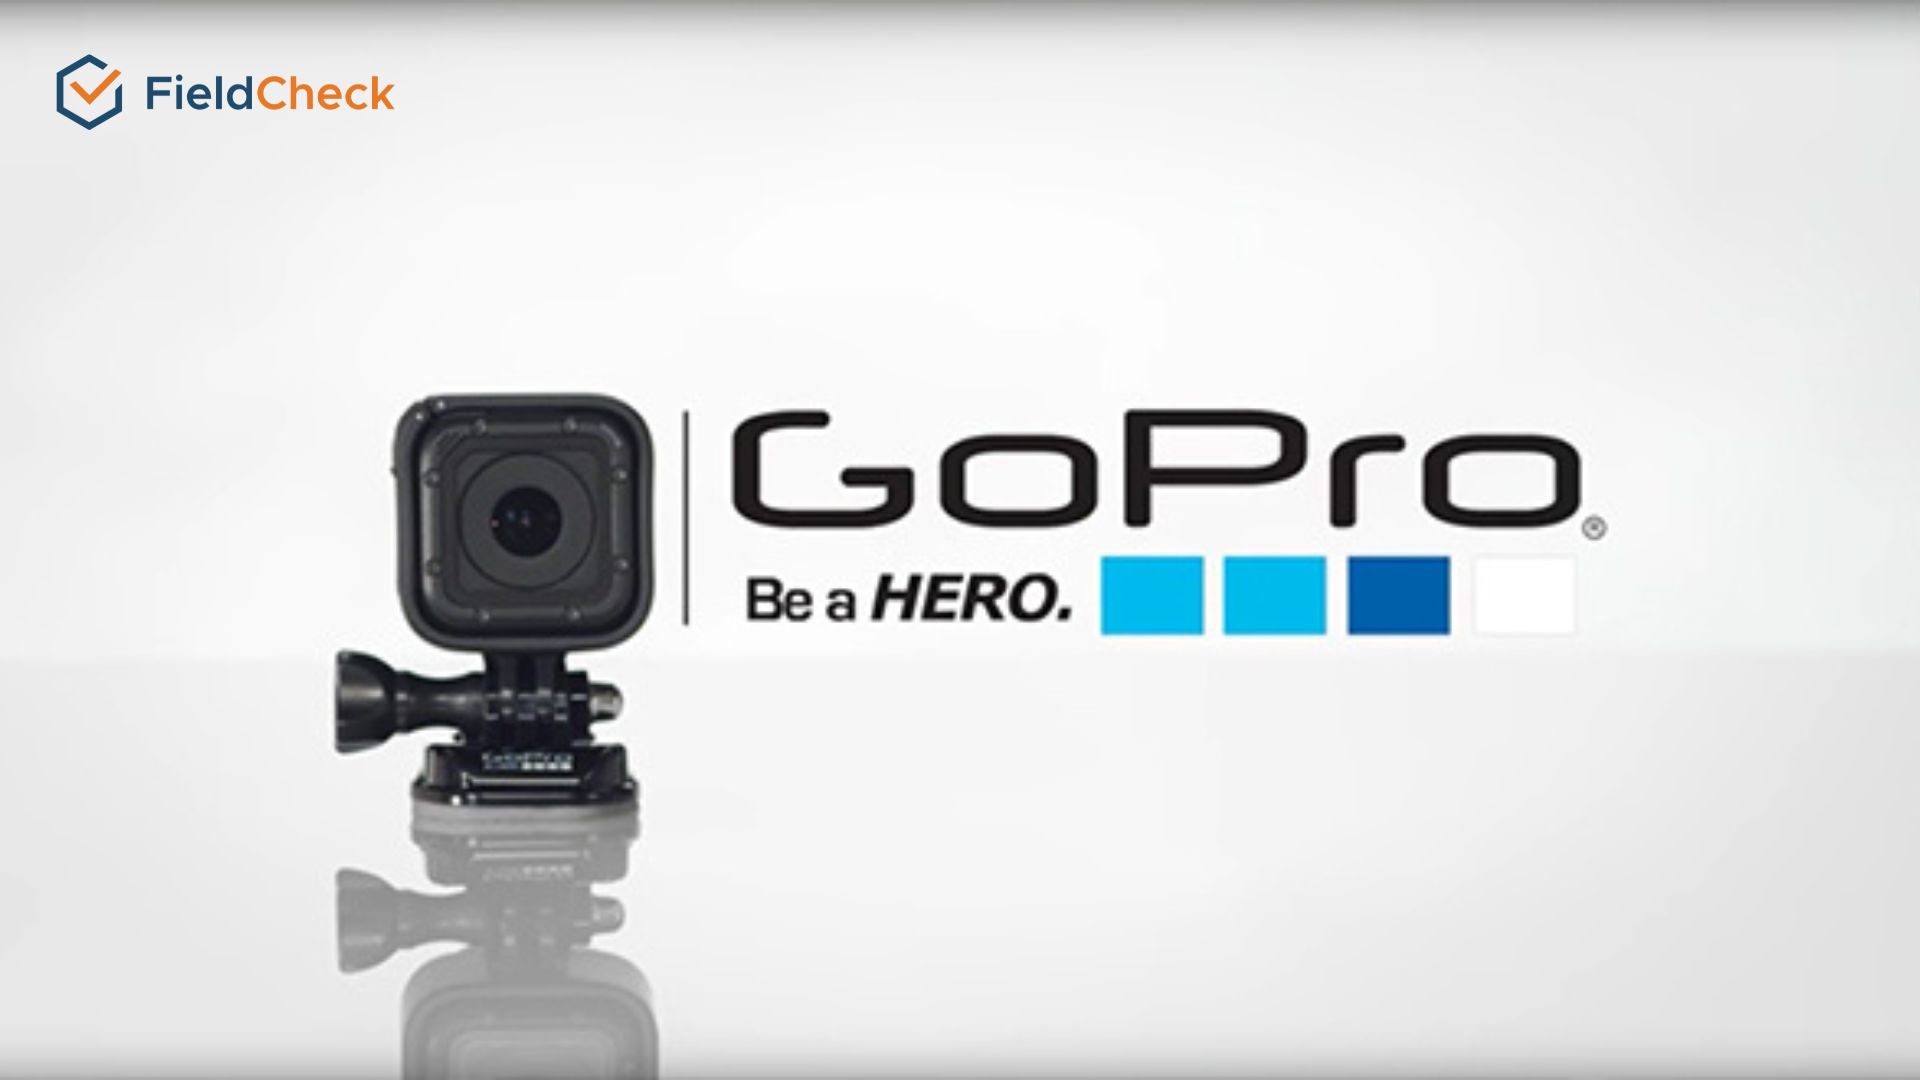 Be a Hero by GoPro